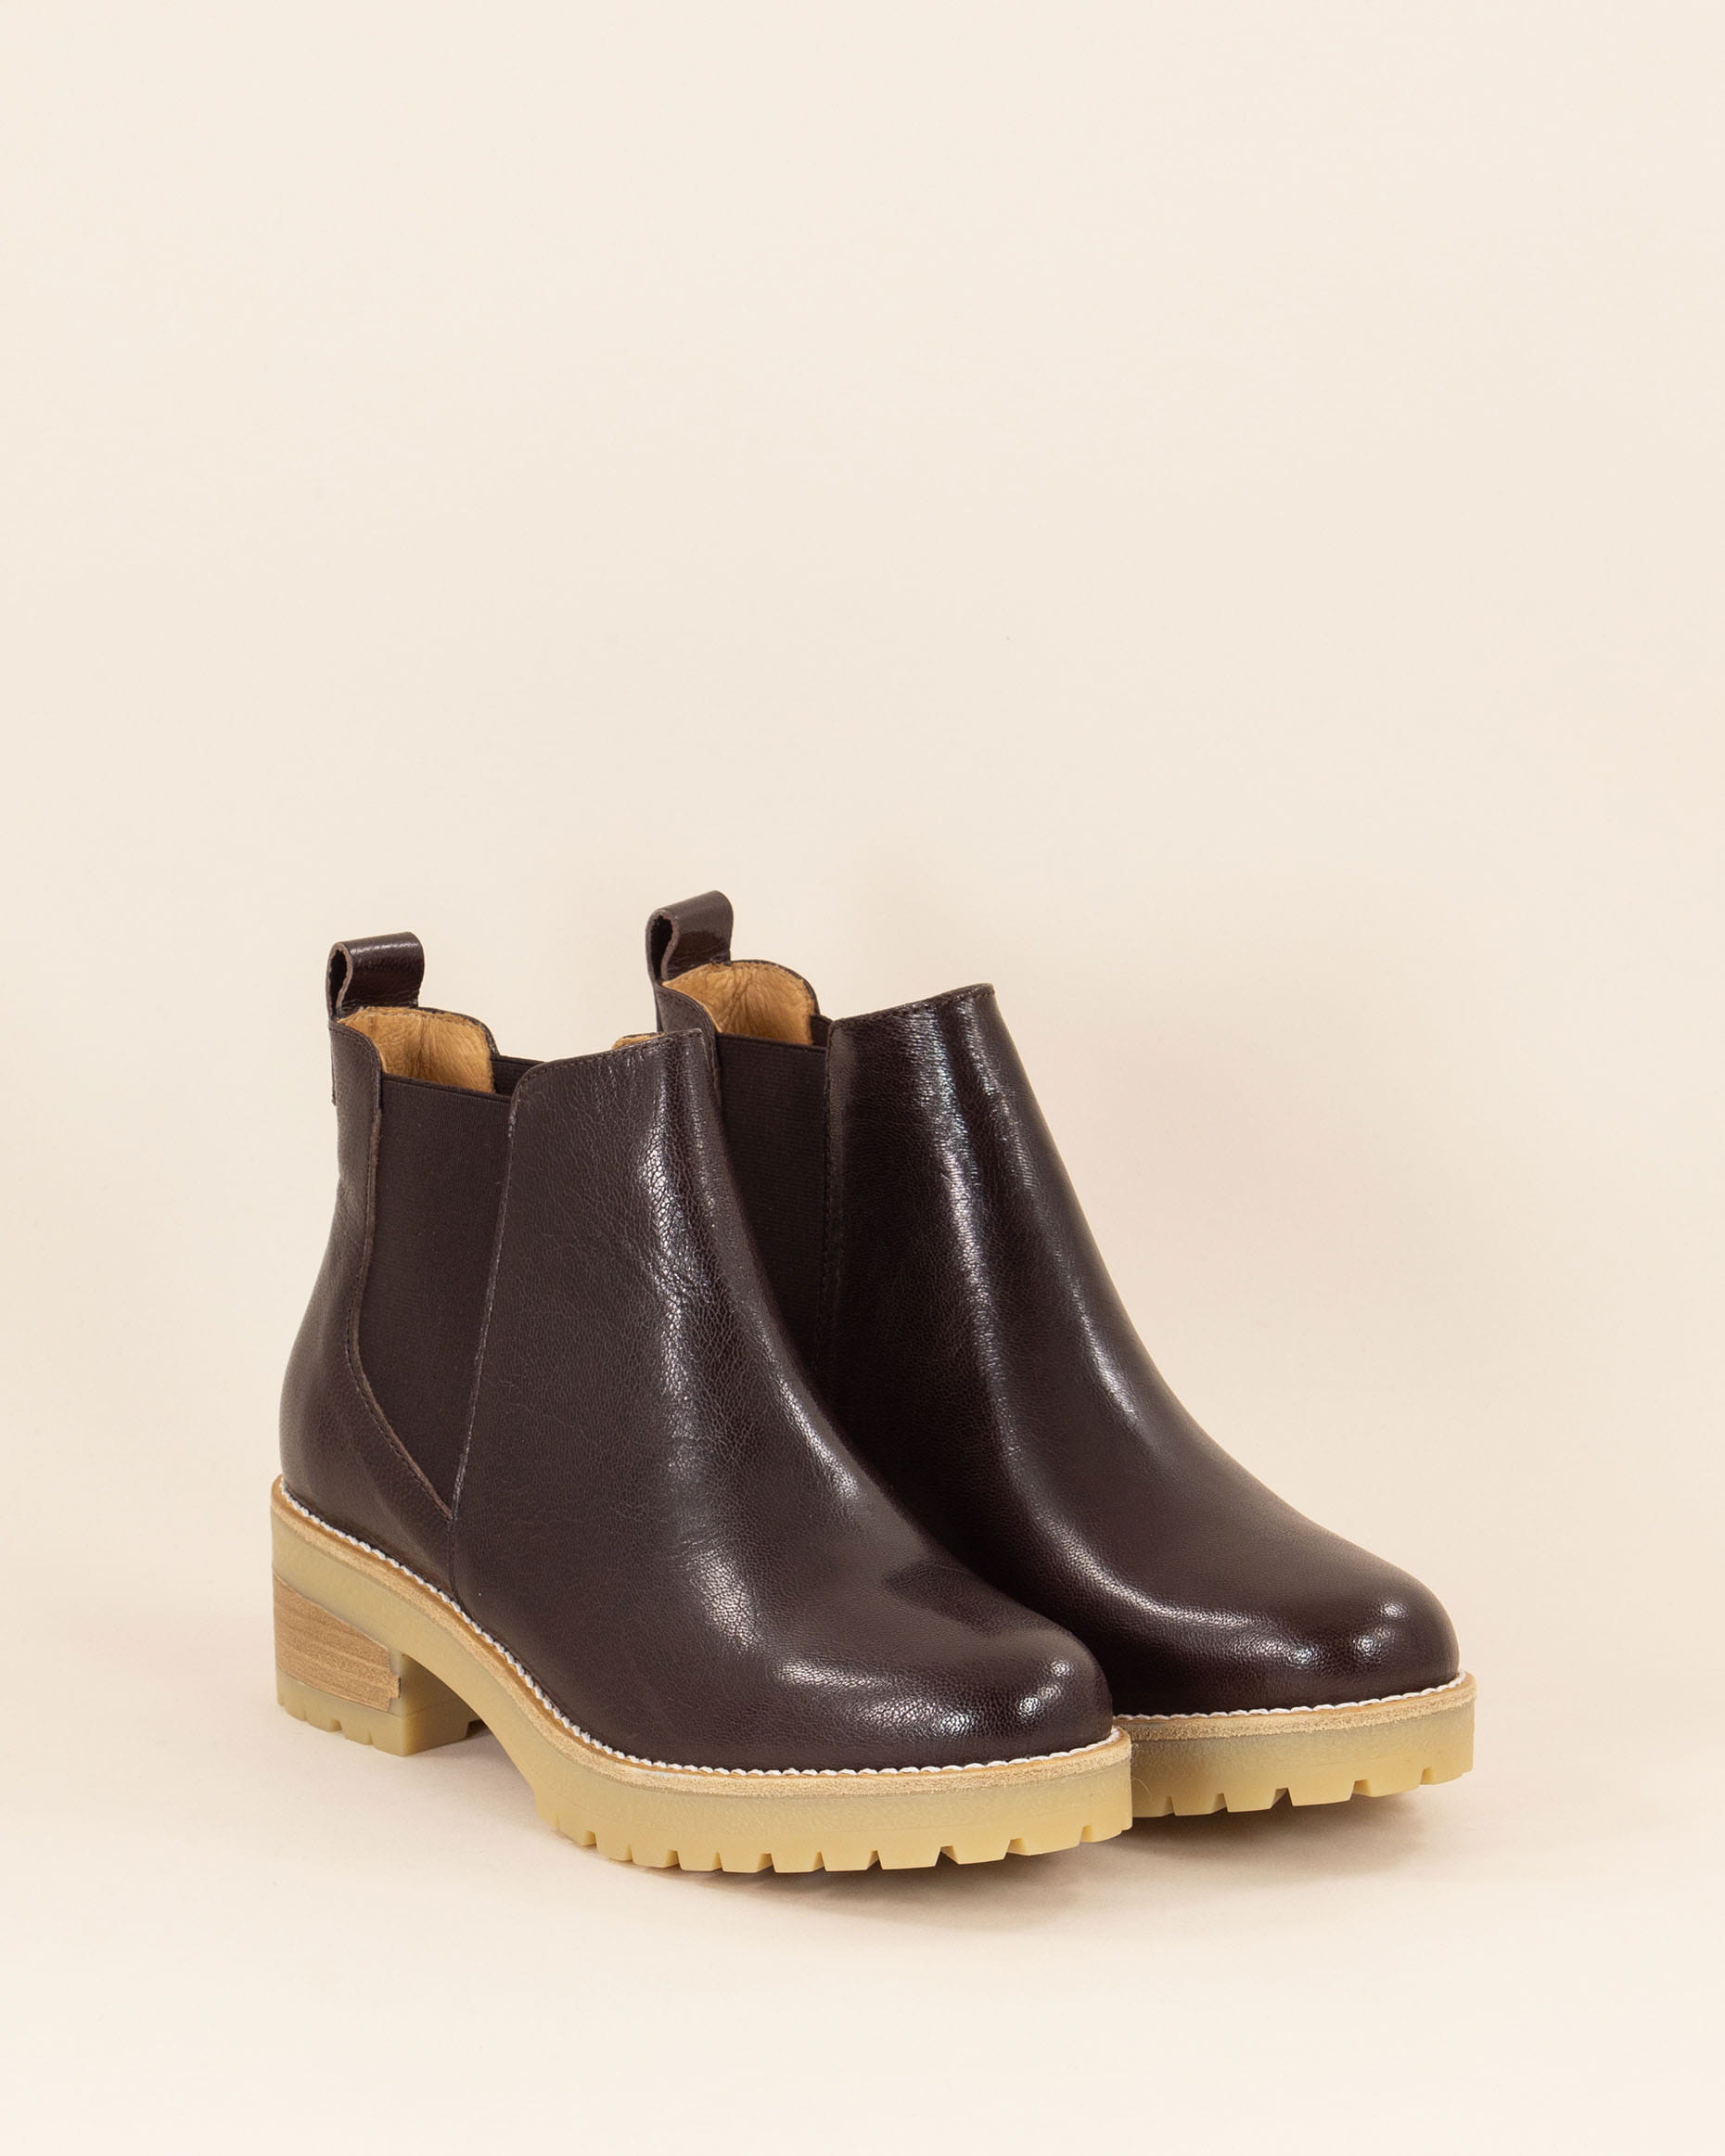 CORDOBA Chocolat Leather | Boots | SESSÙN Official Website